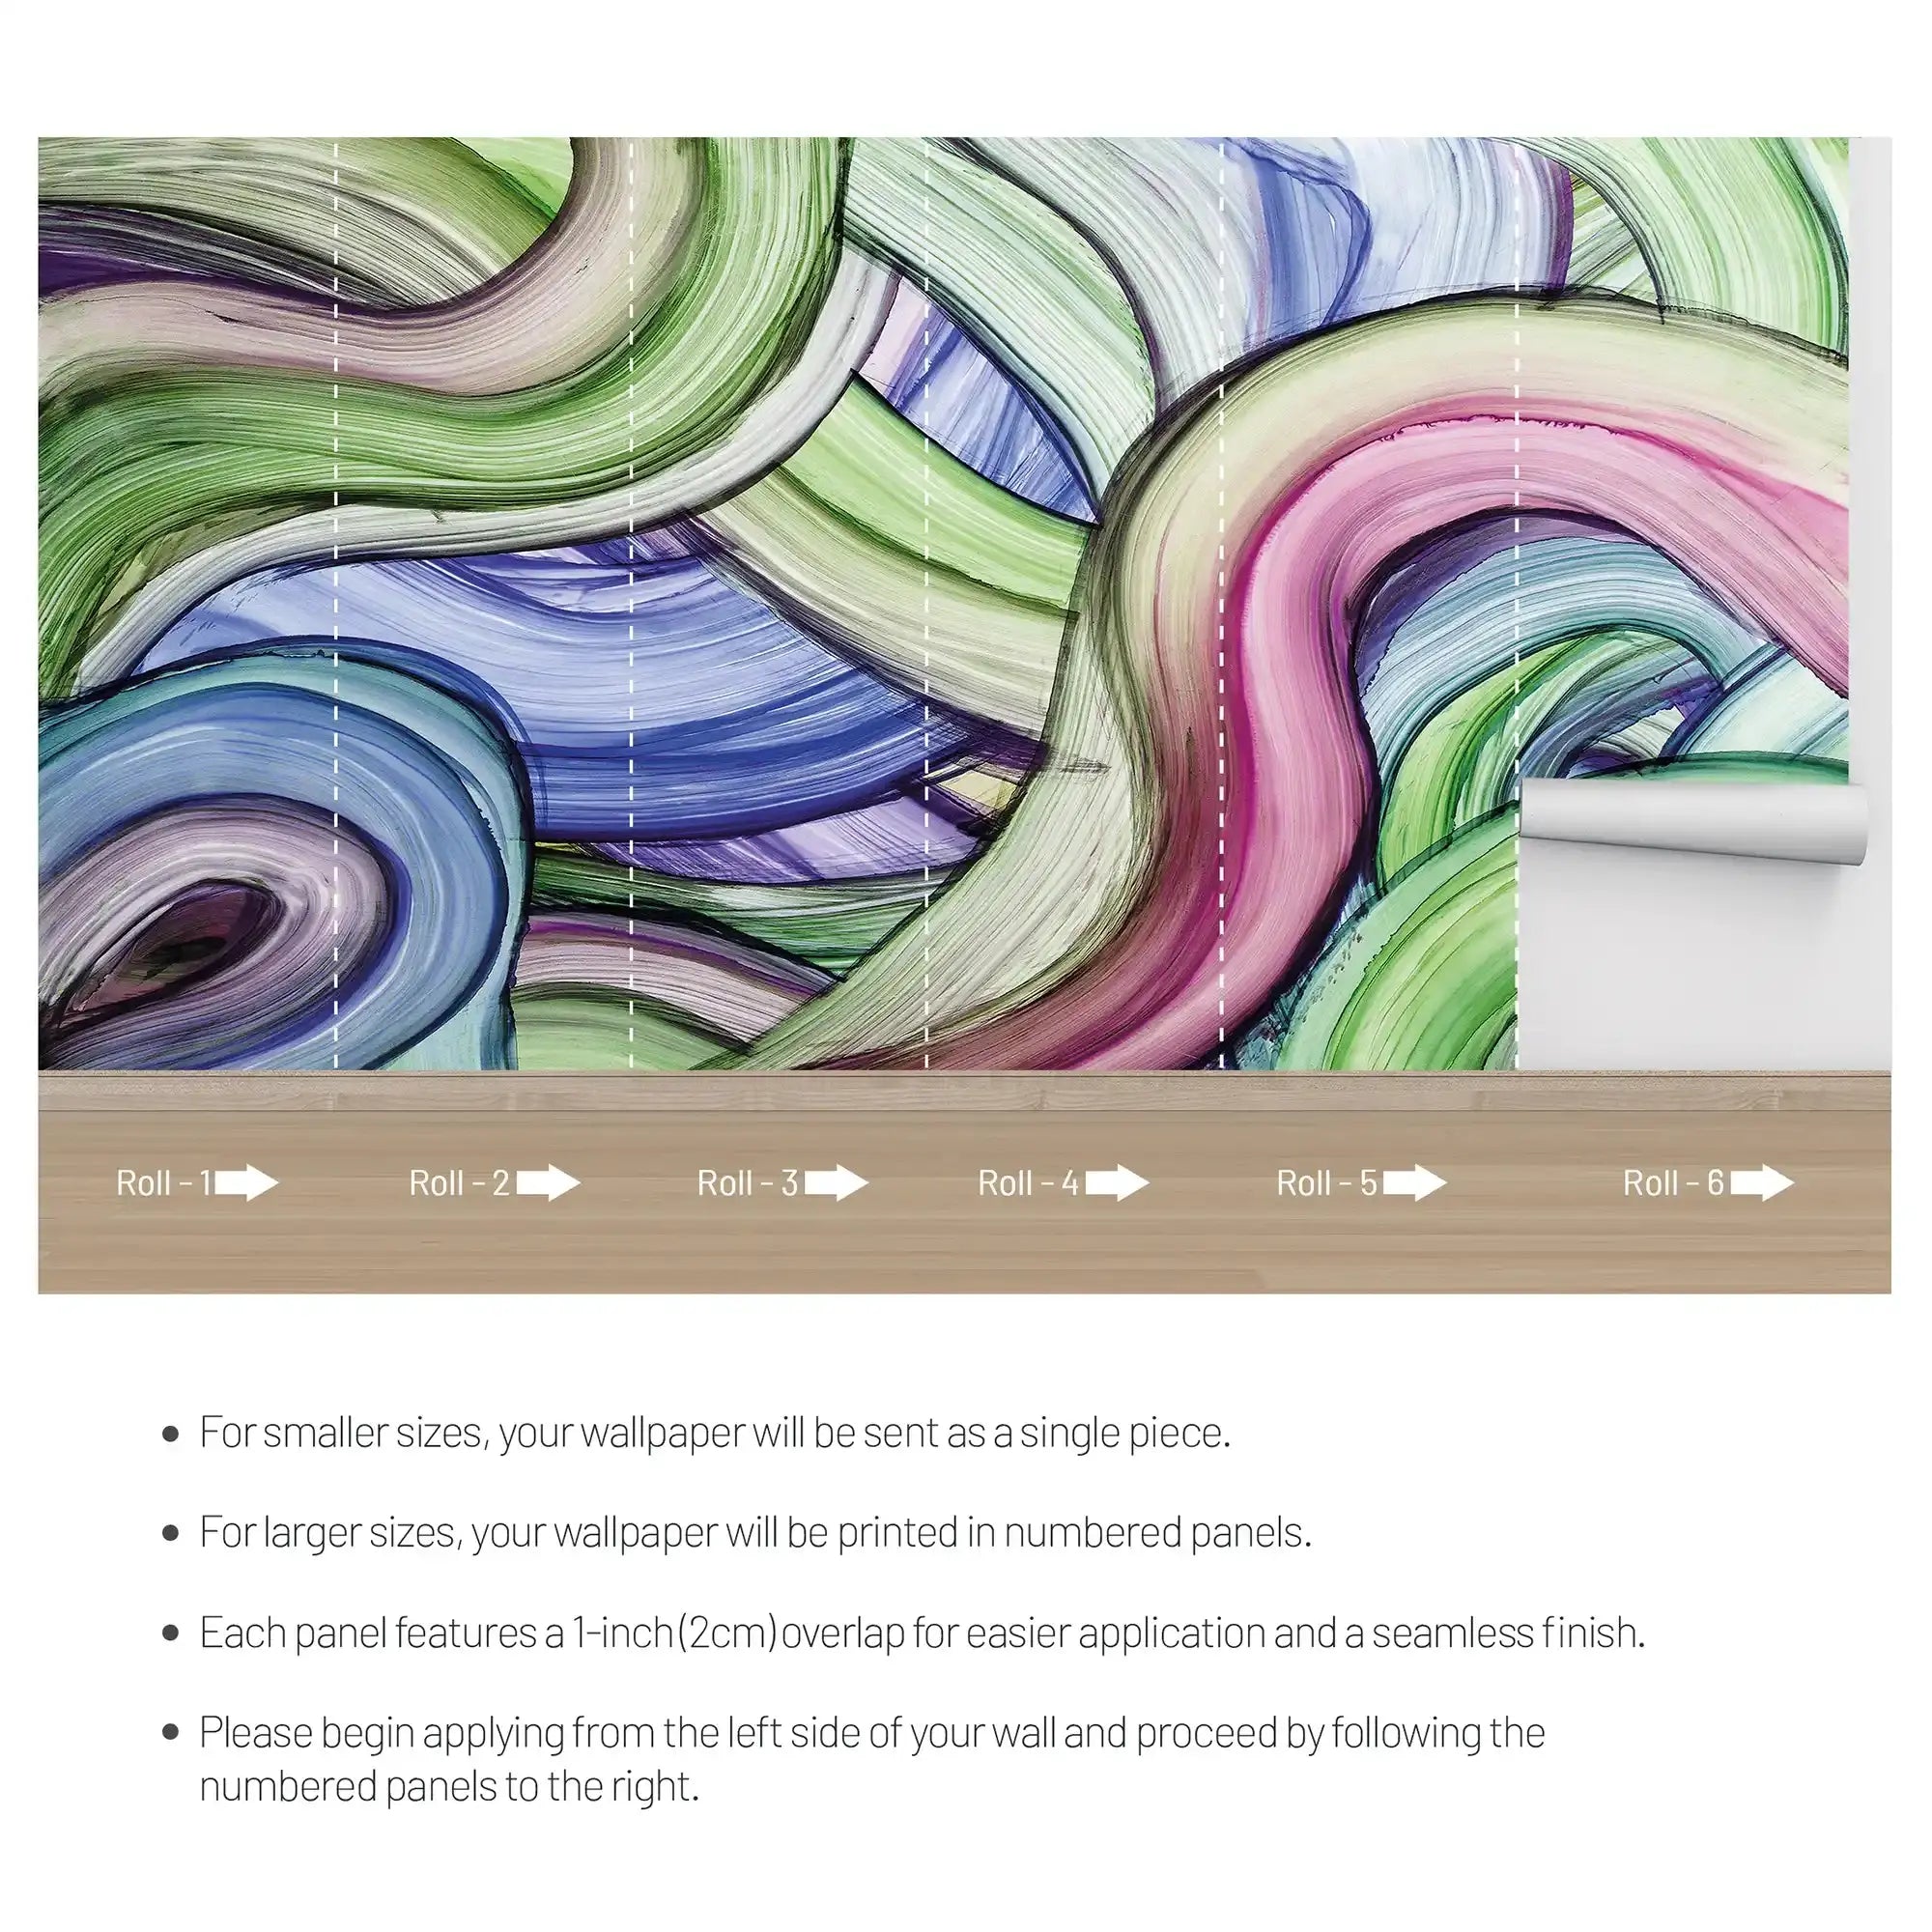 3092-E / Peelable Stickable Wallpaper with Colorful Wavy Lines - Bold, Contemporary Geometric Design for Any Room - Artevella